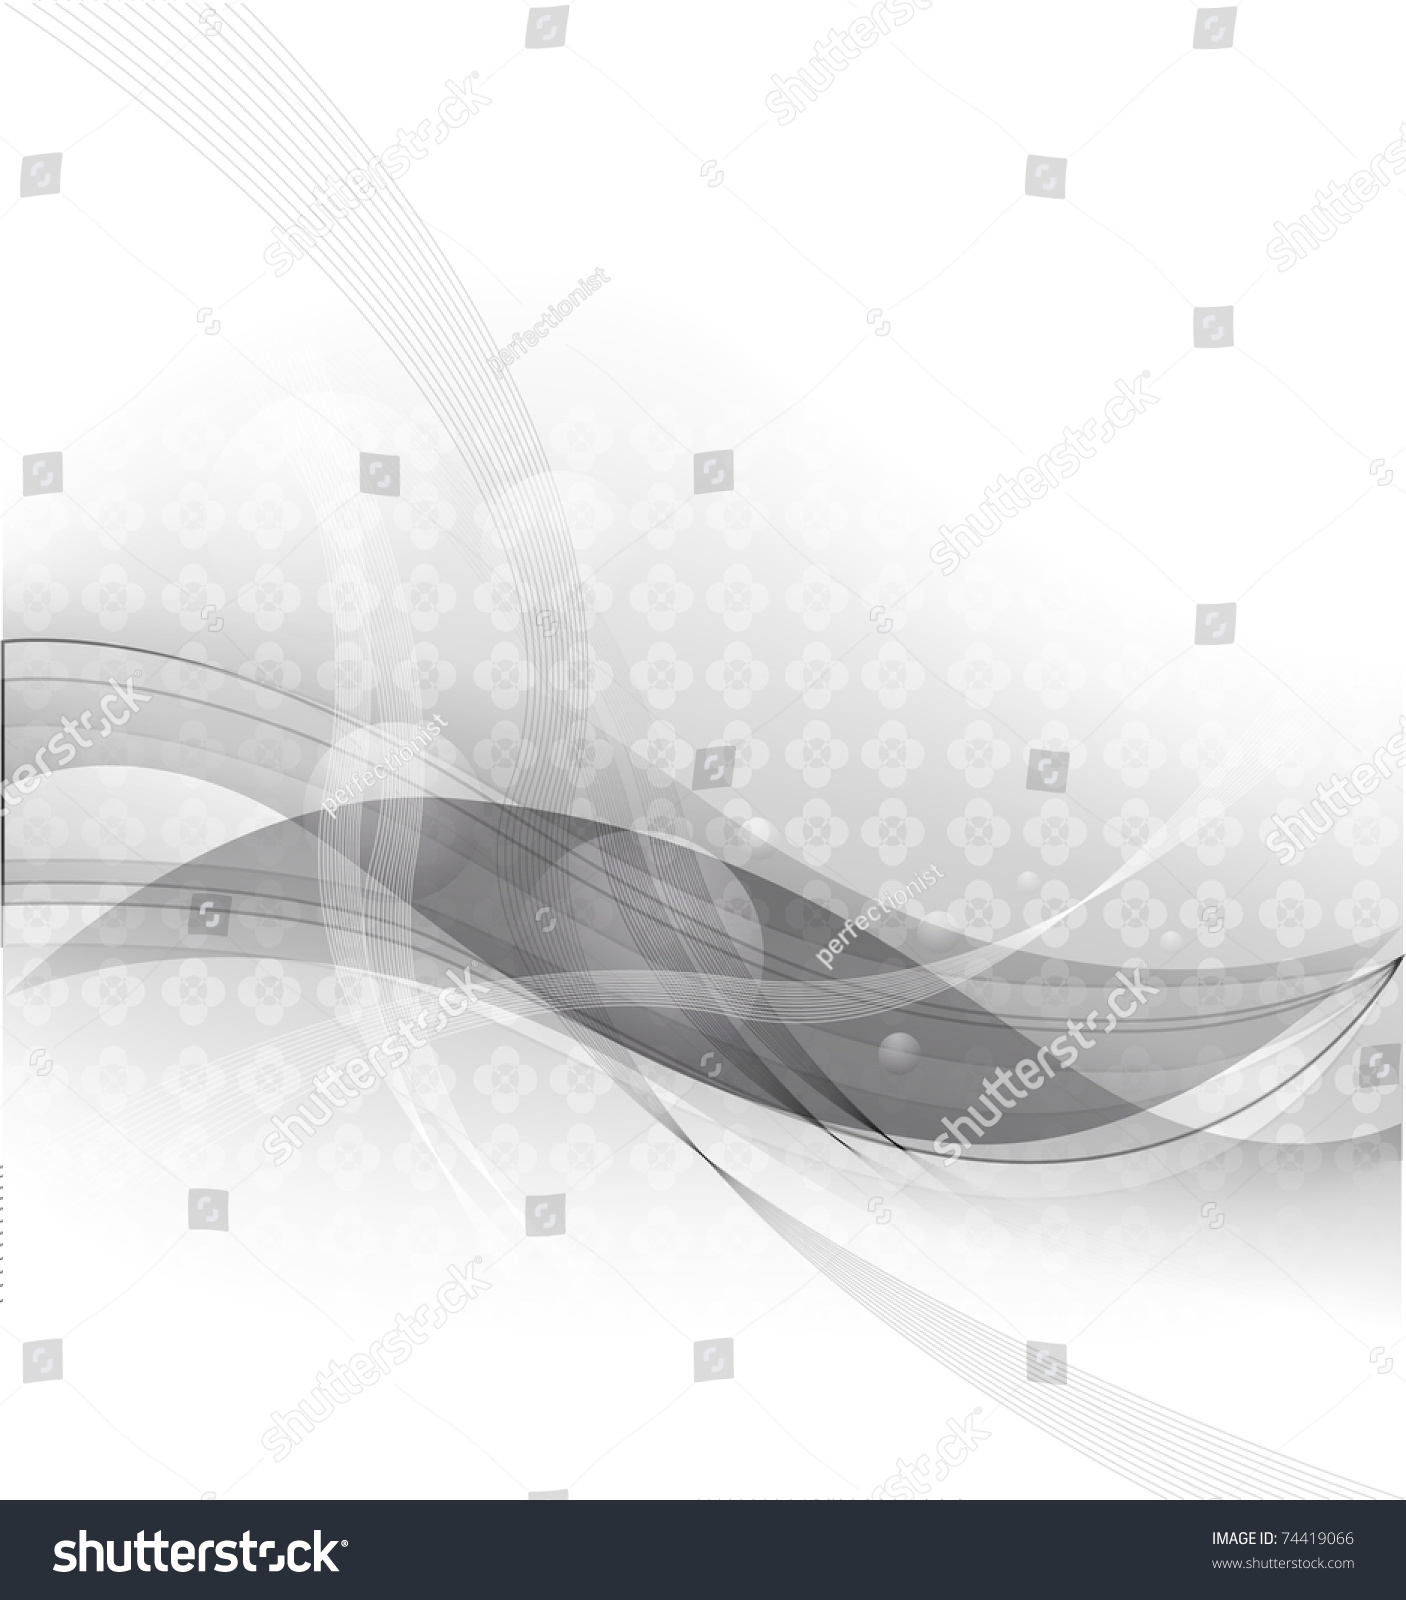 Abstract Vector Background With Gray Stripes - 74419066 : Shutterstock